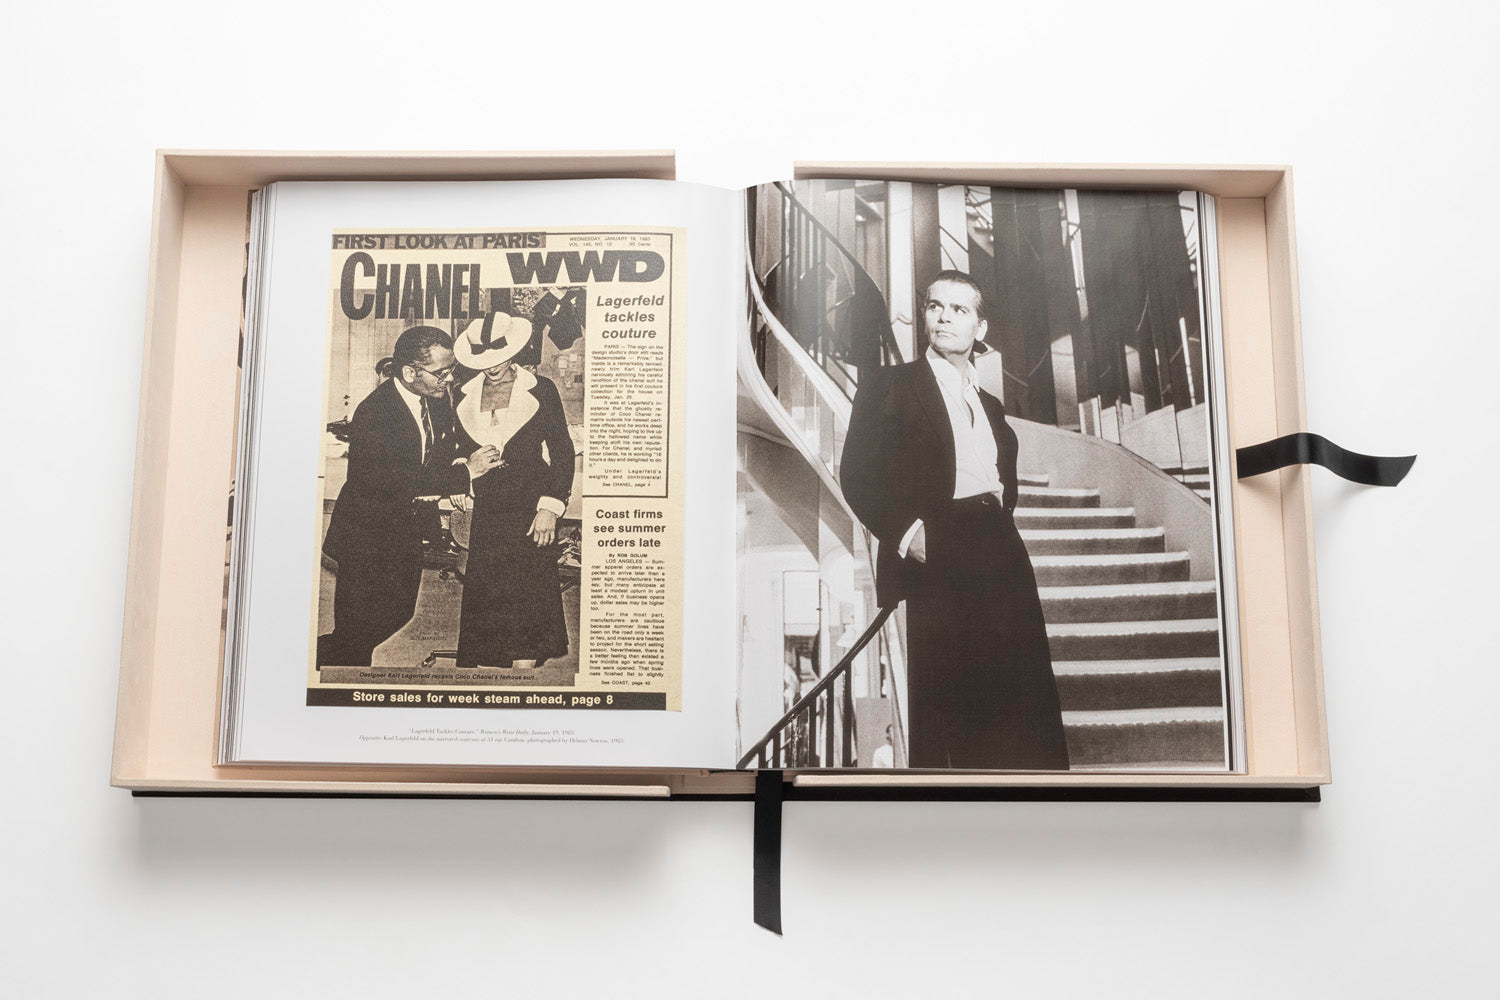 Chanel: The Impossible Collection book by Alexander Fury | ASSOULINE